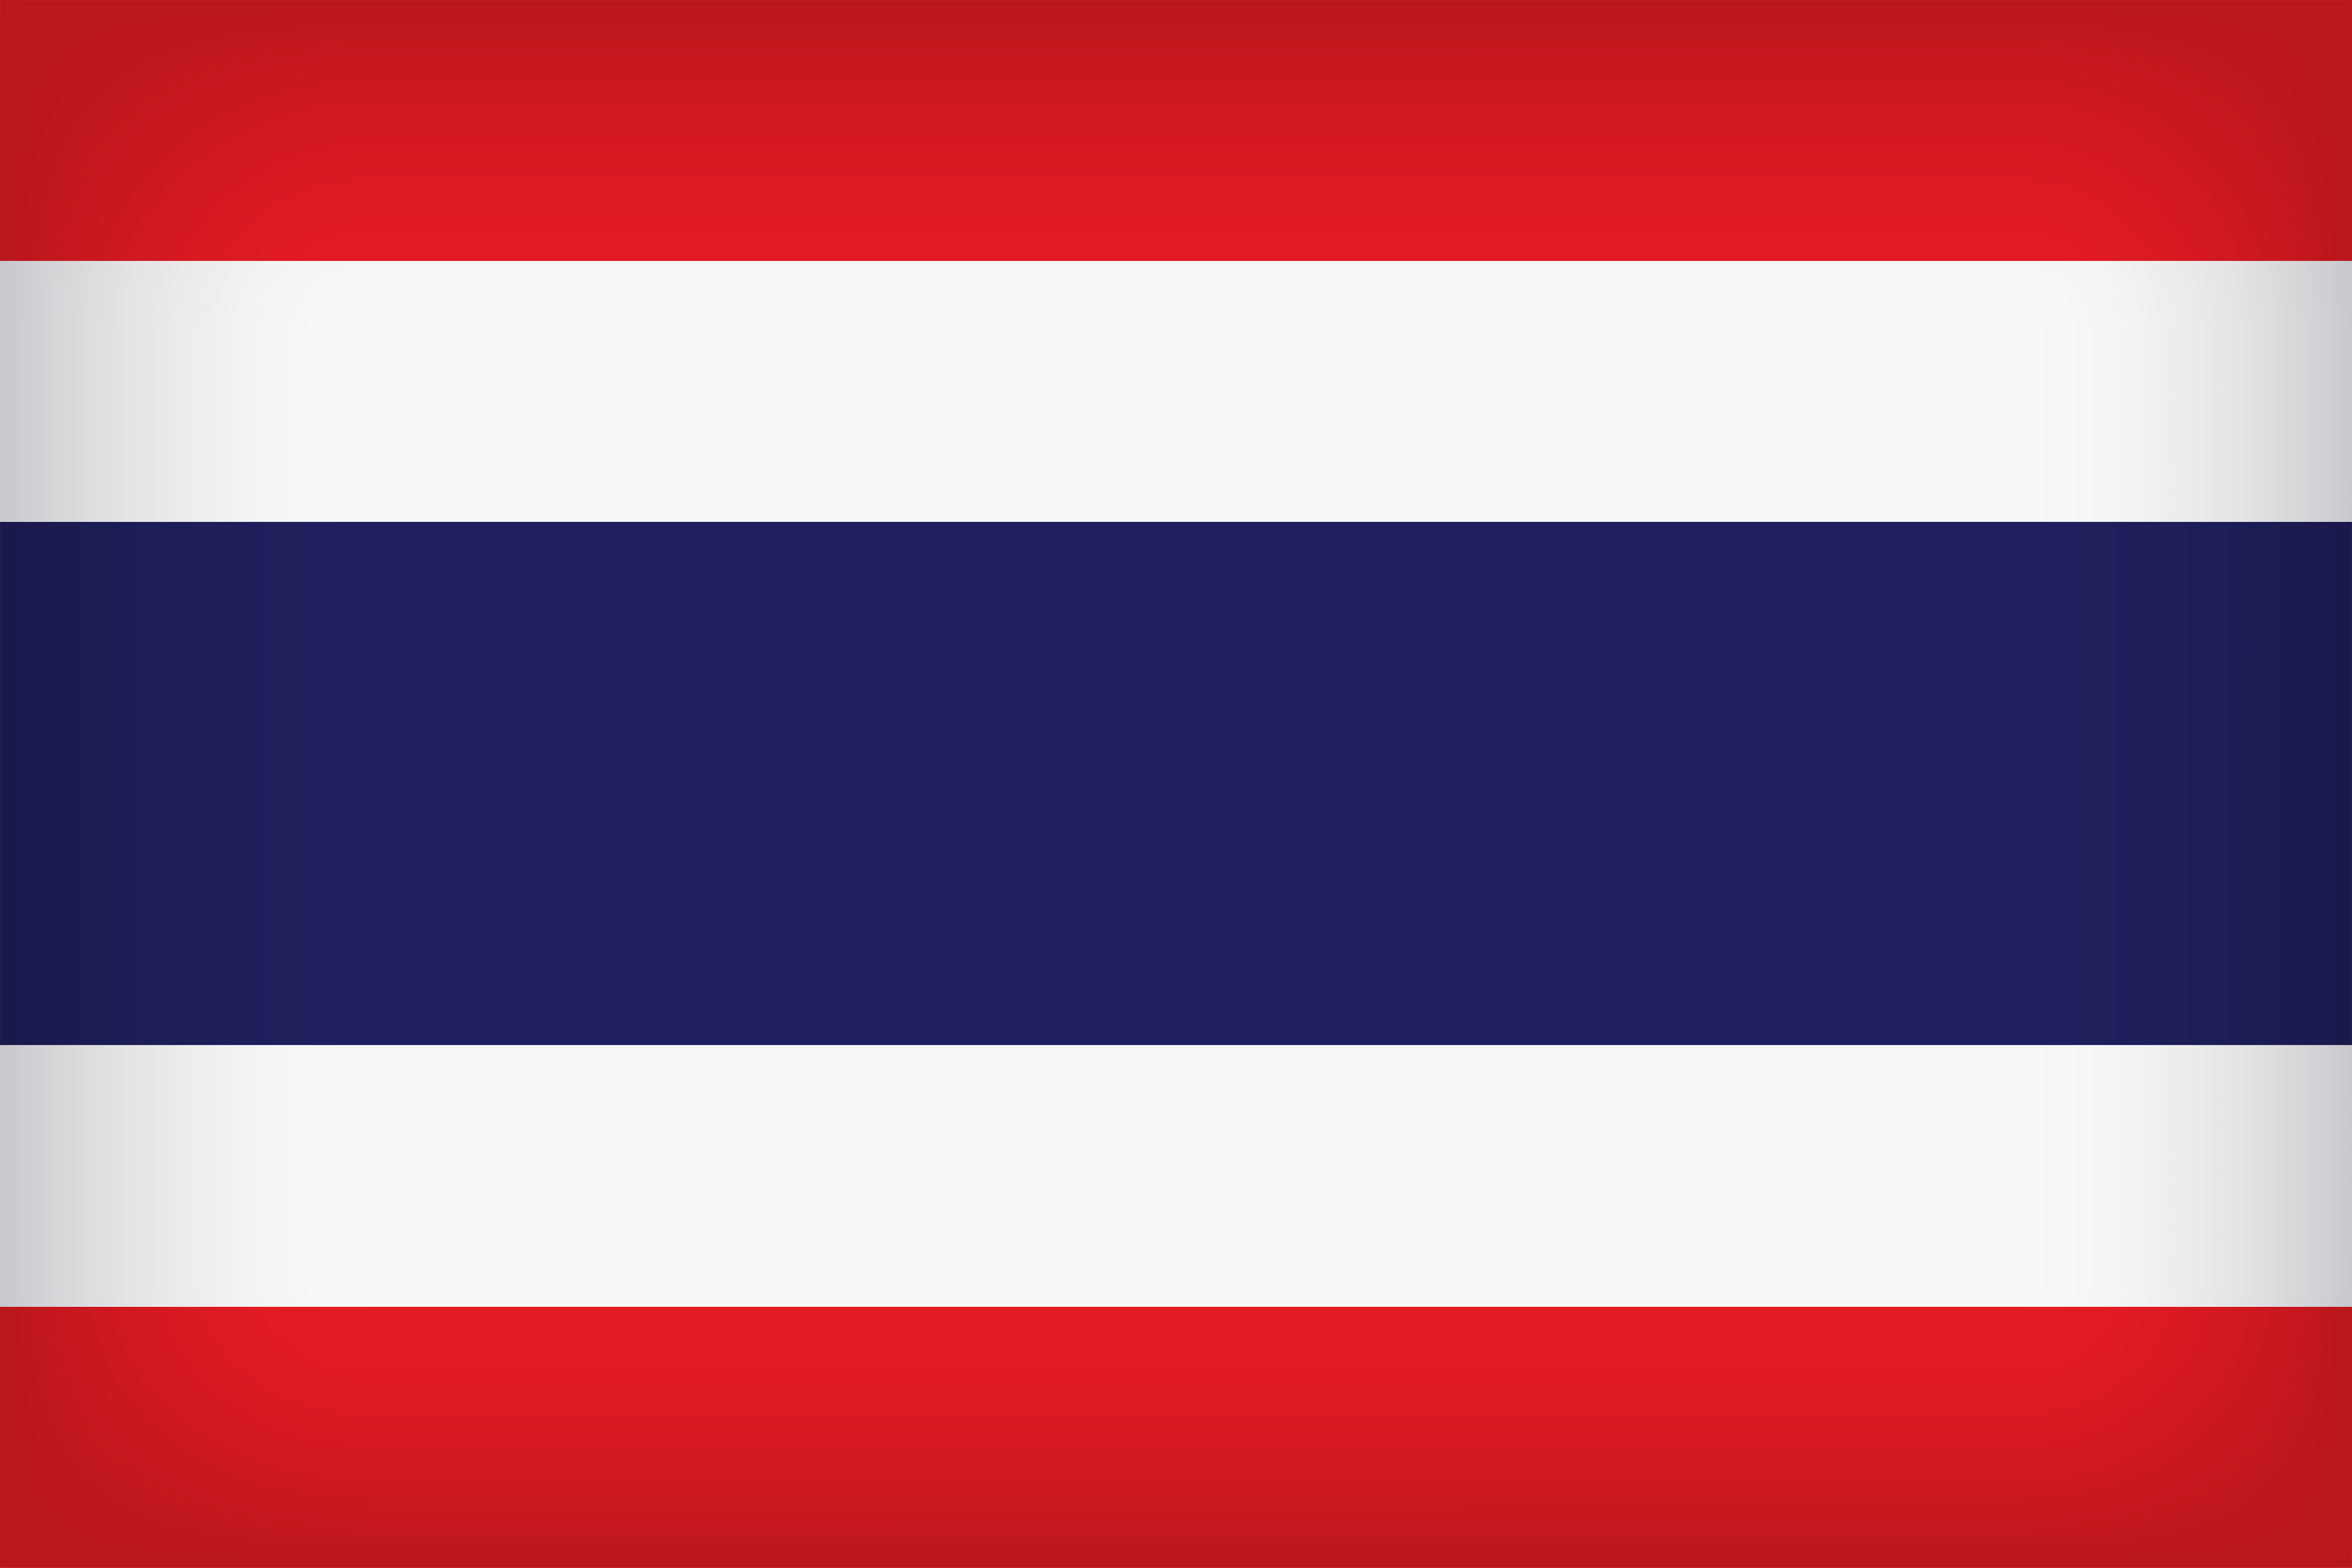 Thailand Large Flag | Gallery Yopriceville - High-Quality Images and